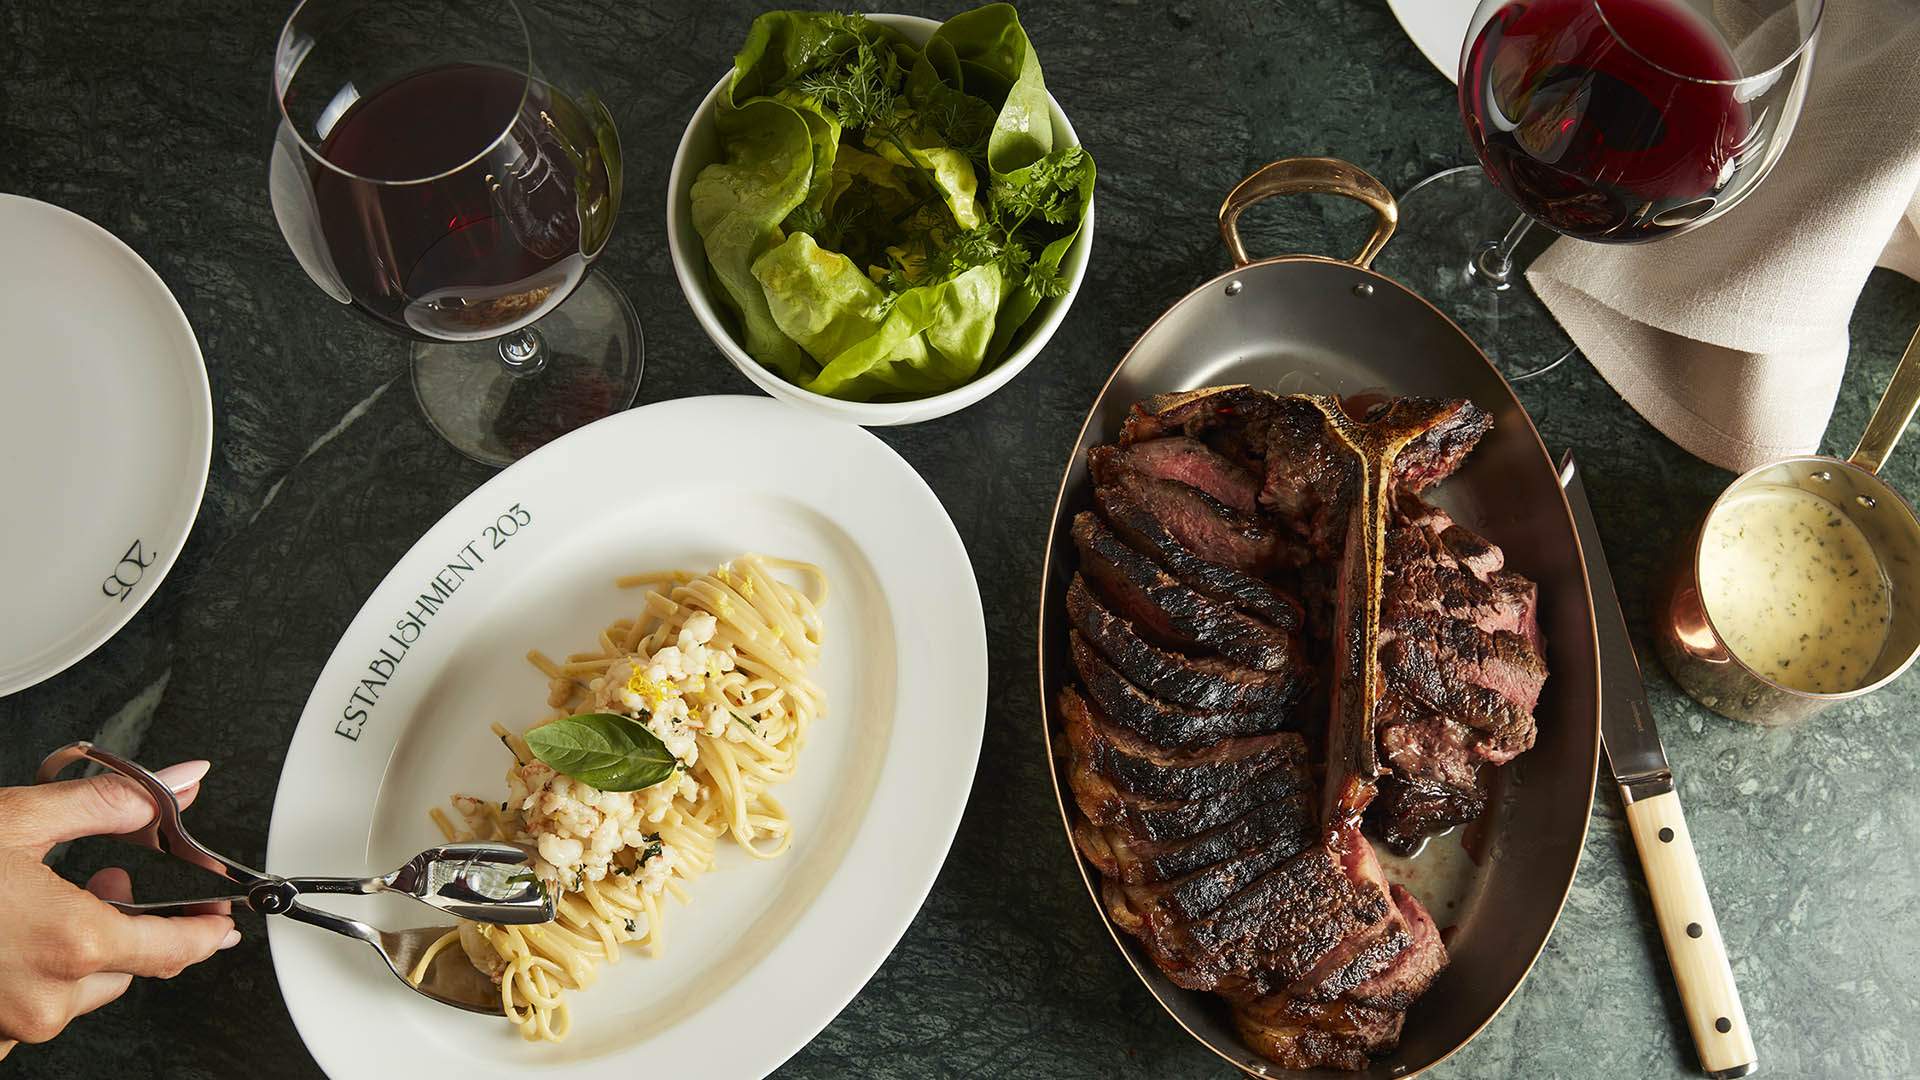 Ben O’Donoghue’s new Italian steakhouse No. 203 will open in Fortitude Valley this month